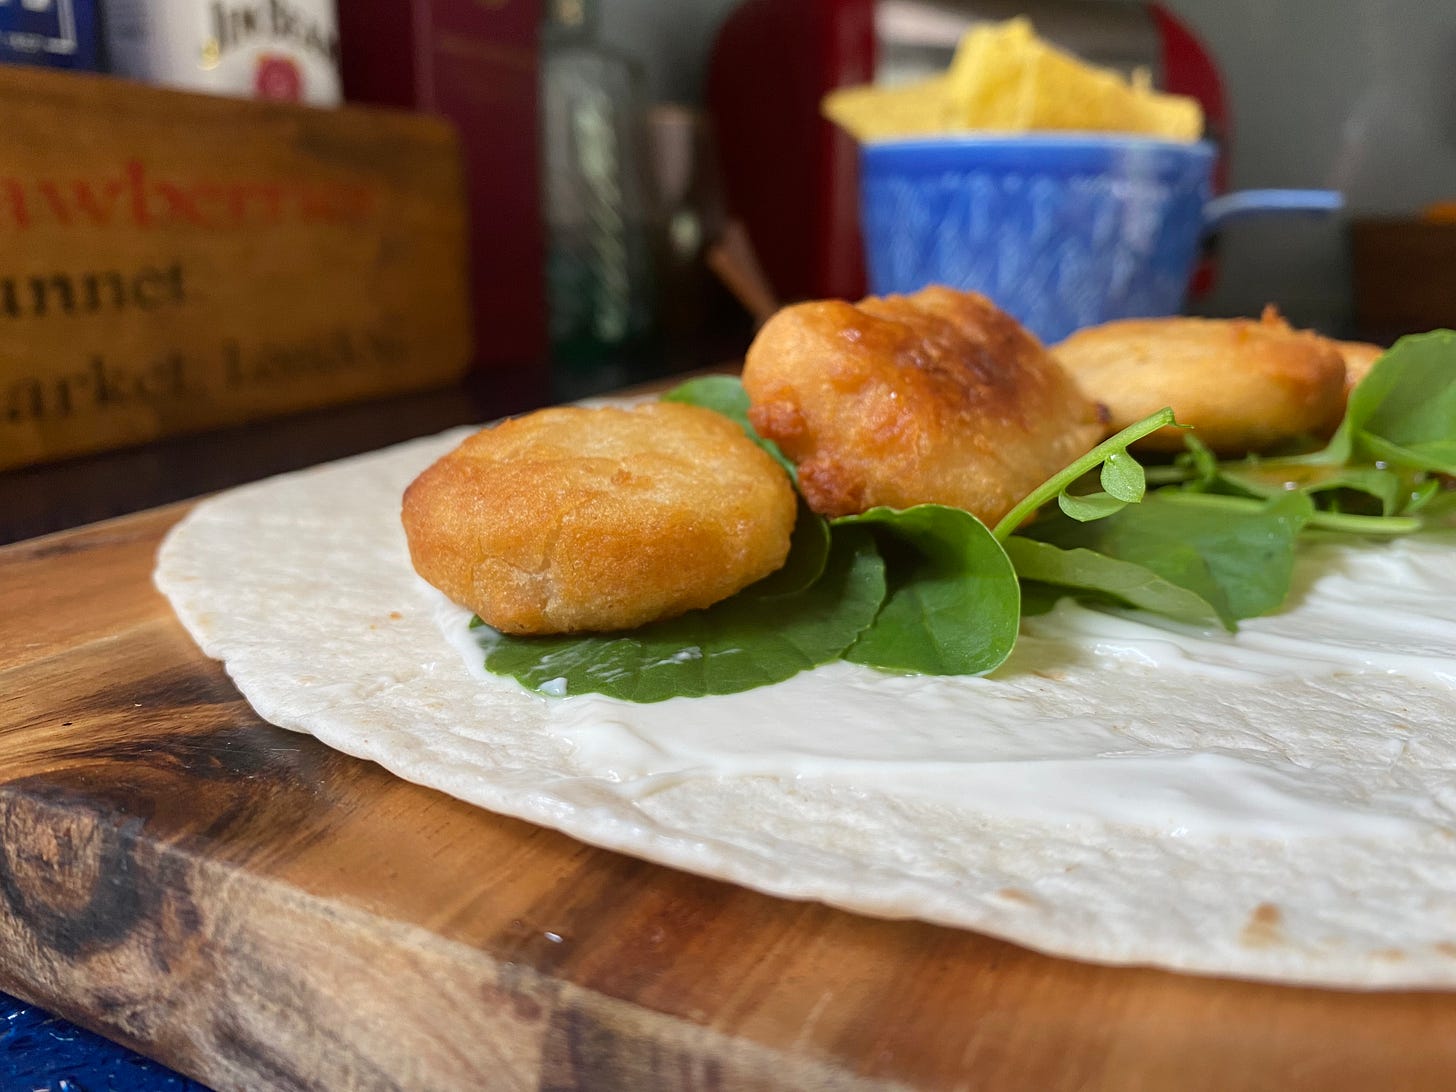 Wooden board with an open tortilla wrap with nuggets, mayonnaise and salad leaves